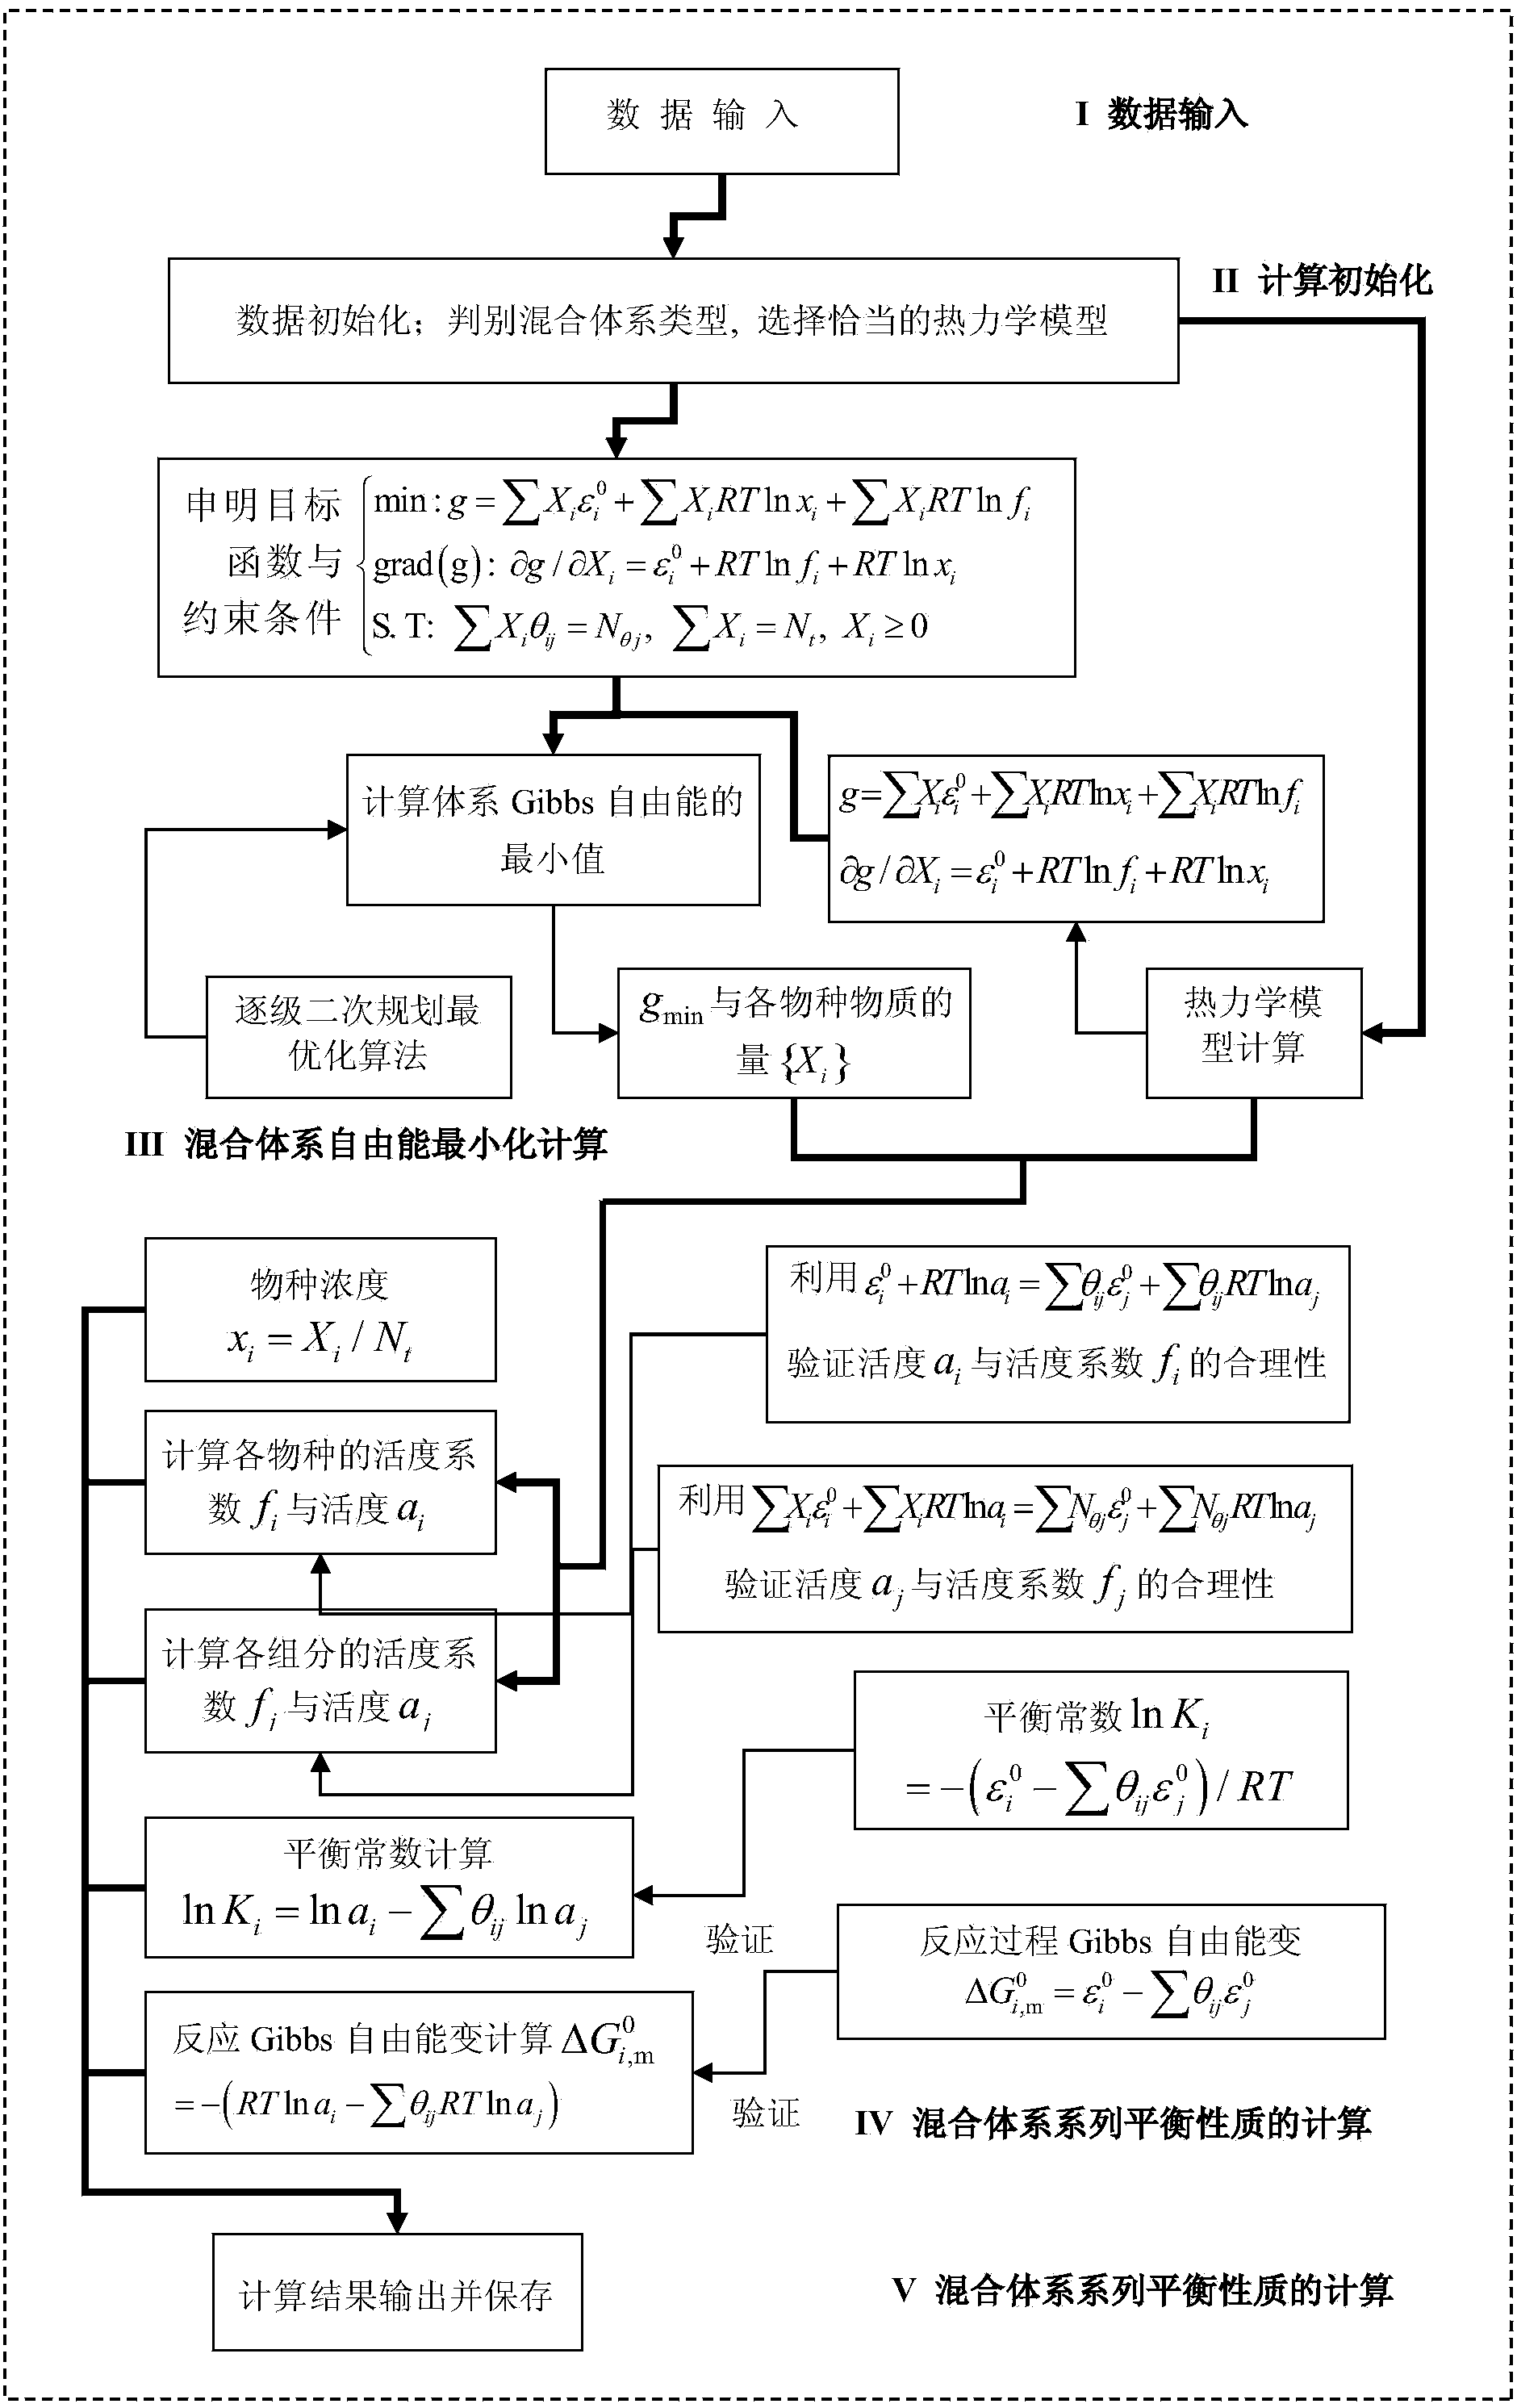 Multiple fluid phase mixed system chemical equilibrium calculating system